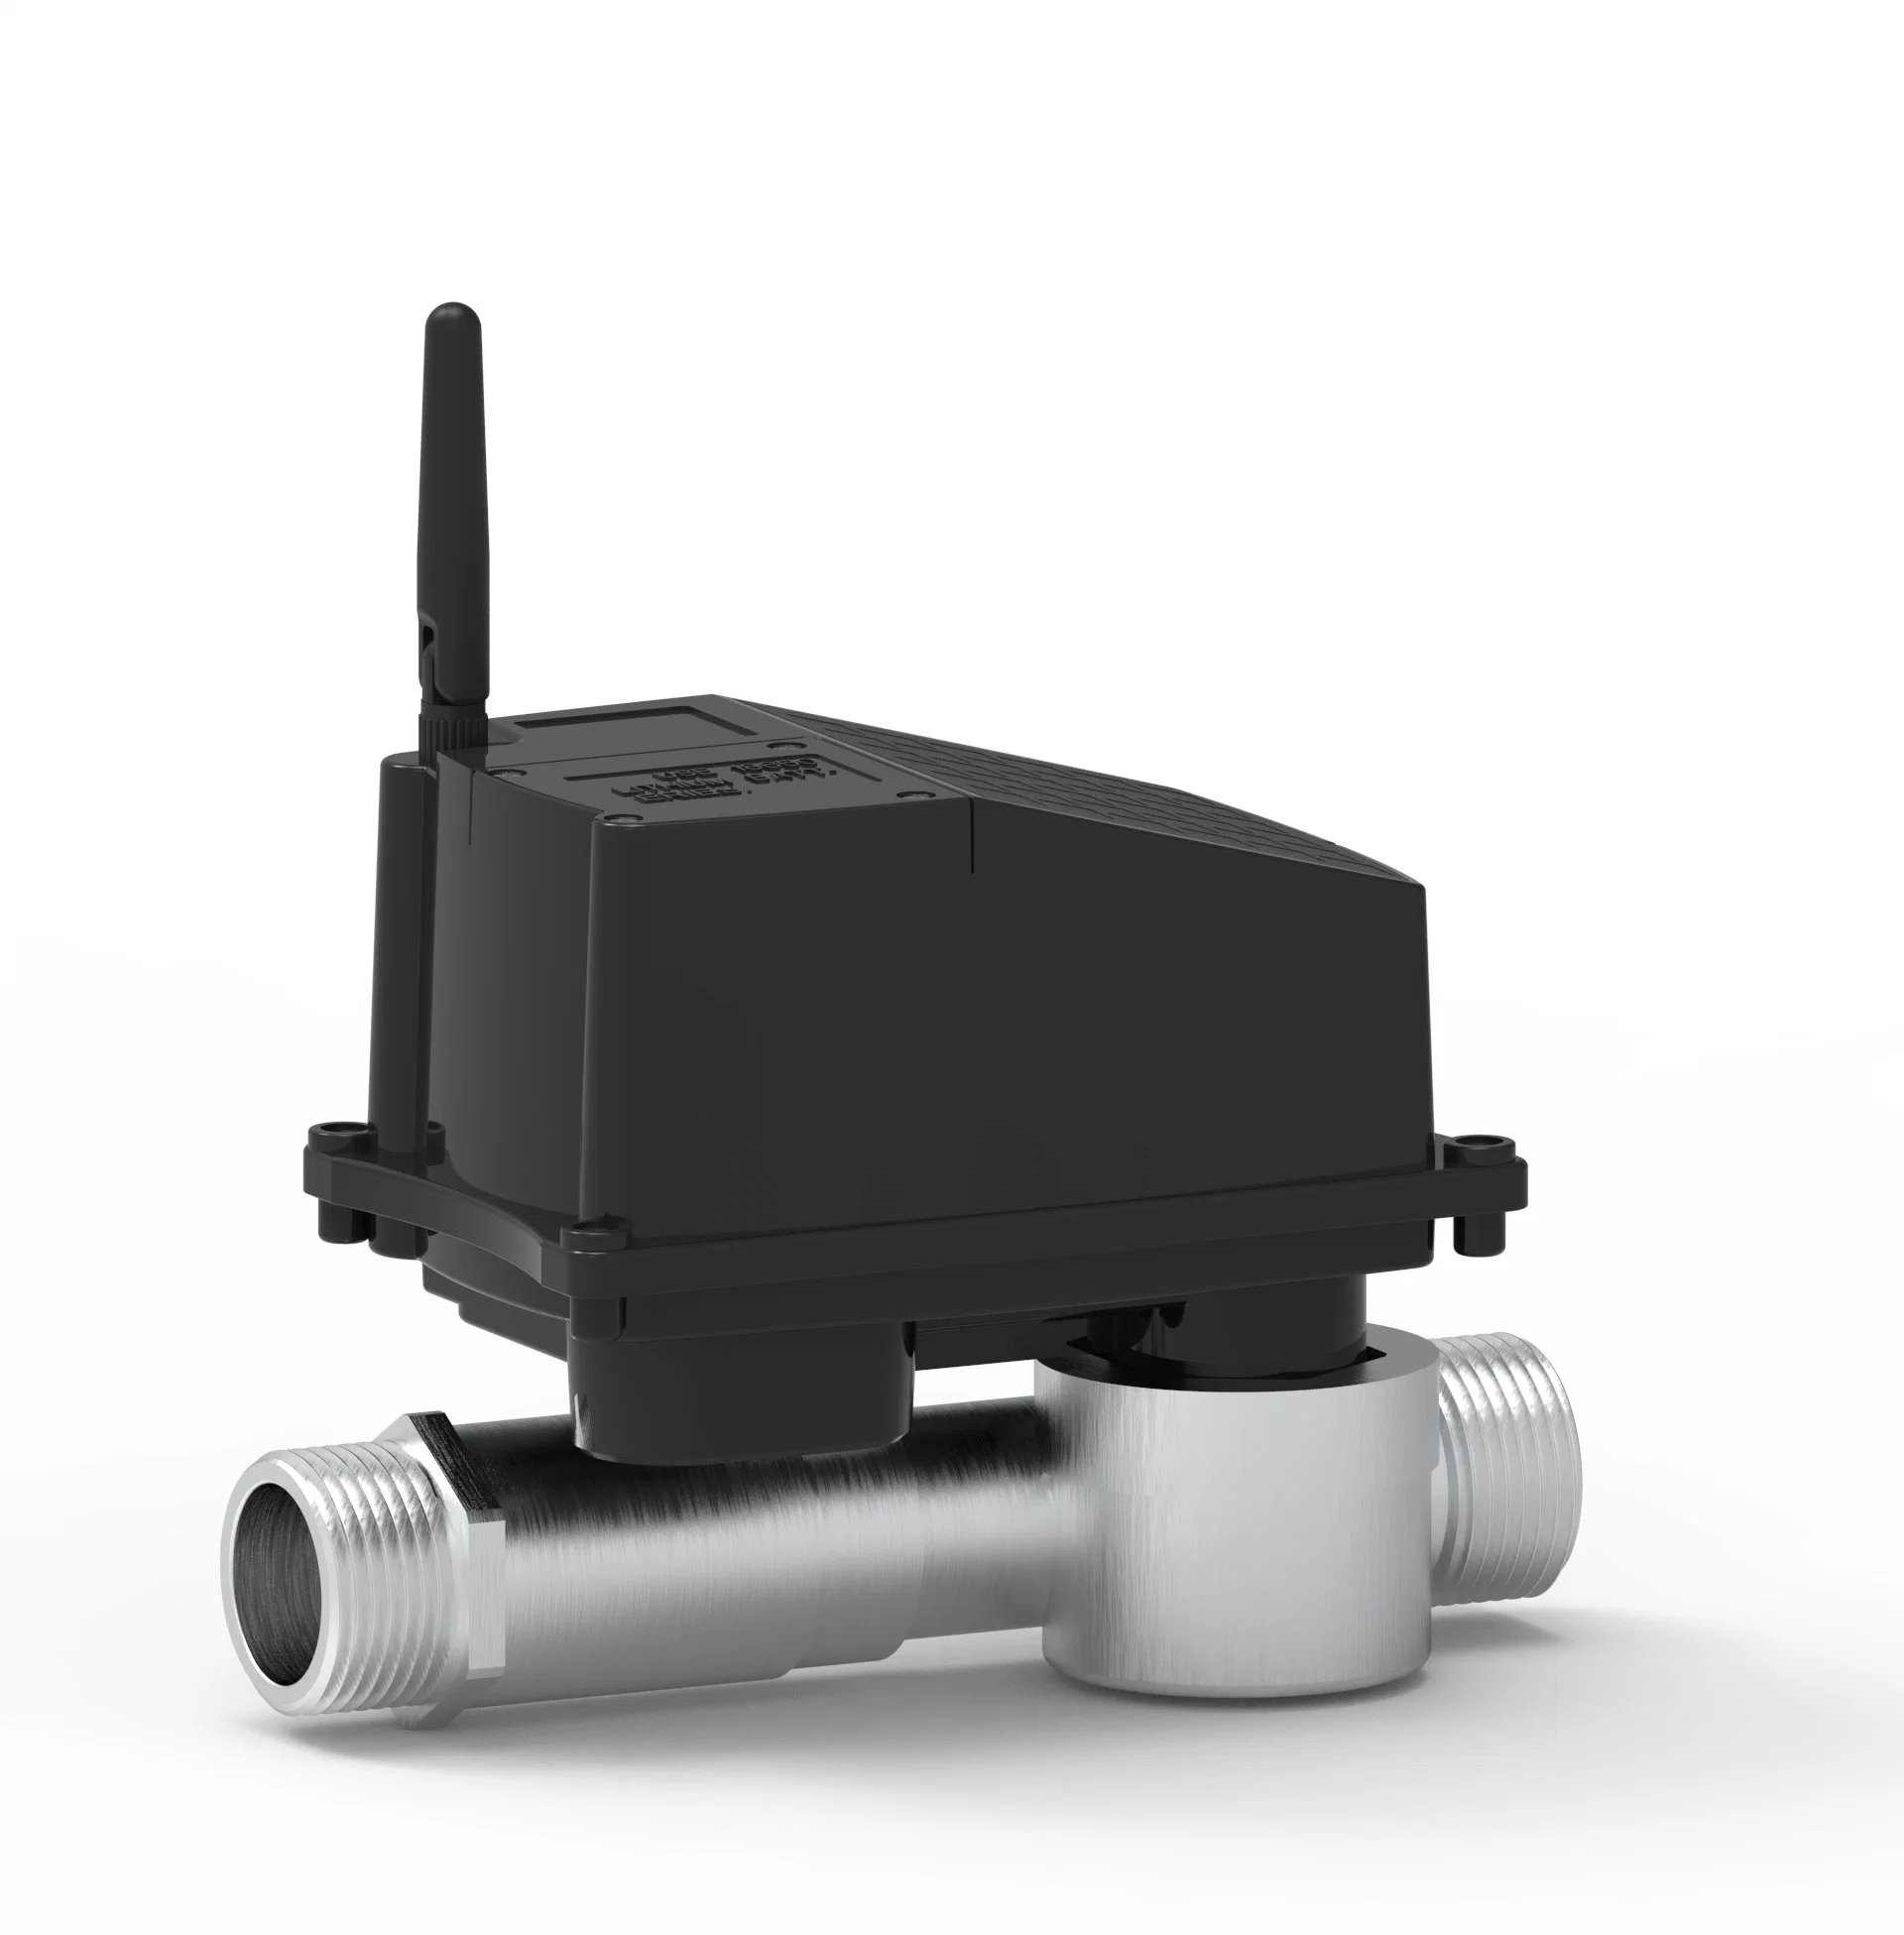 Nb-Iot Wireless Water Shut off Valve to Automate Water Heater, Boiler, Radiant Heat Systems